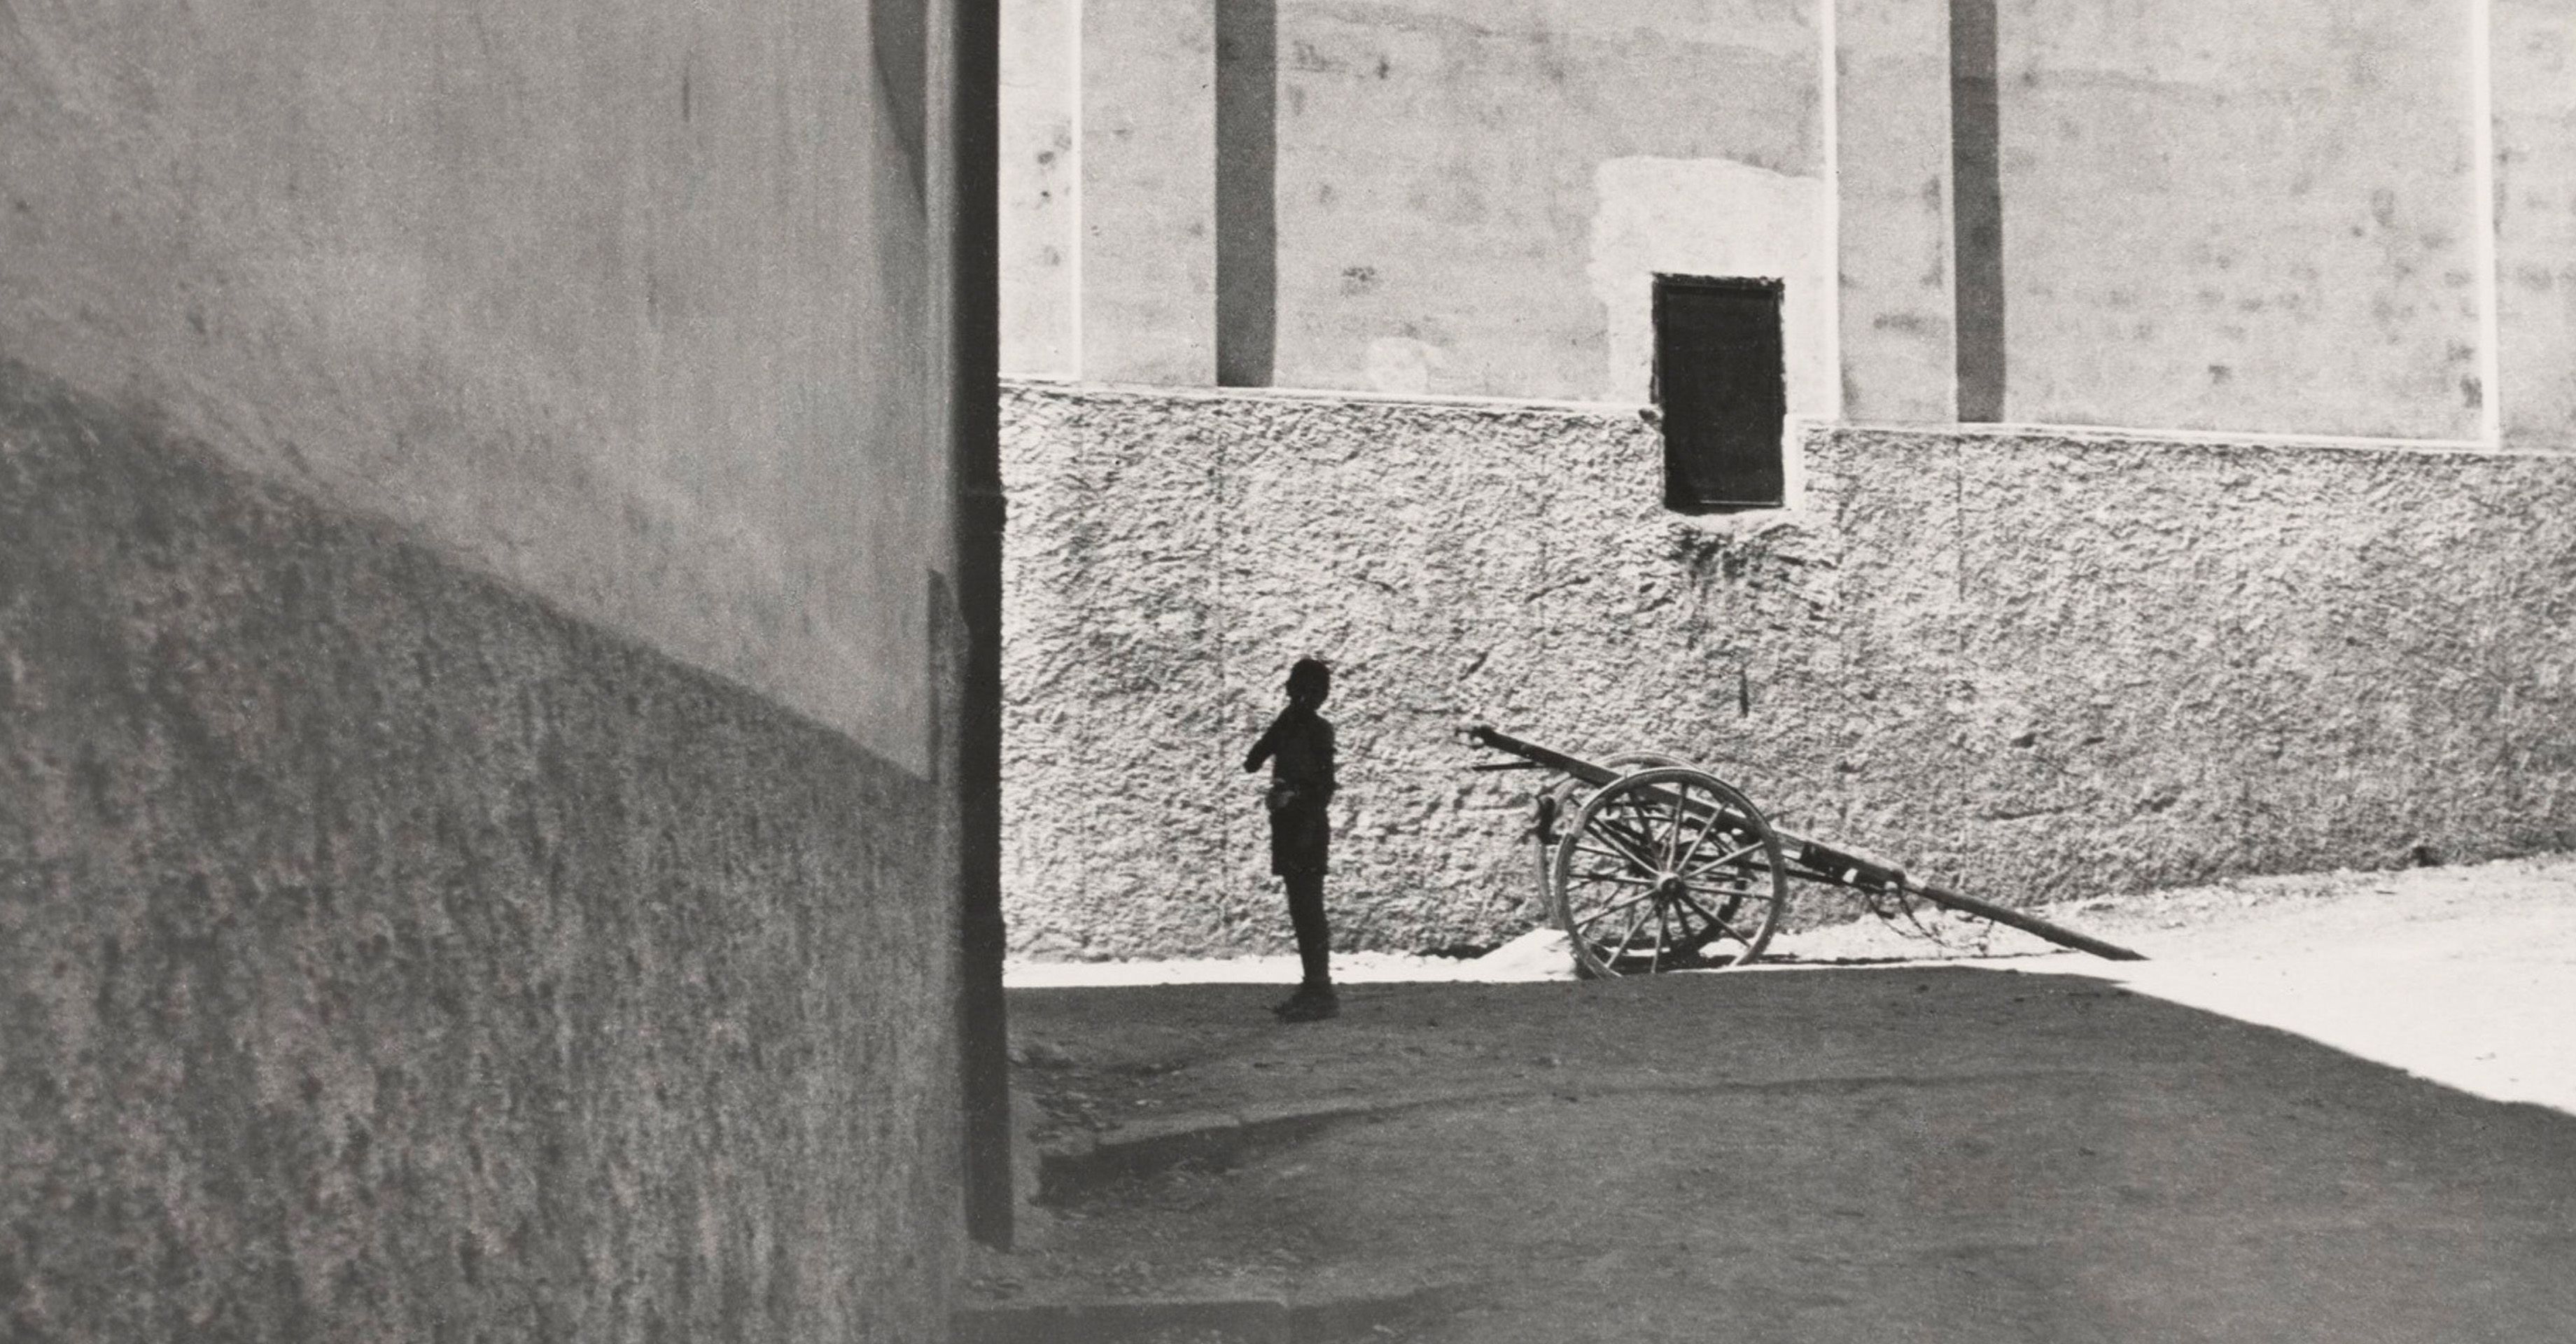 The Greats: How Henri Cartier-Bresson Captured Candid Moments